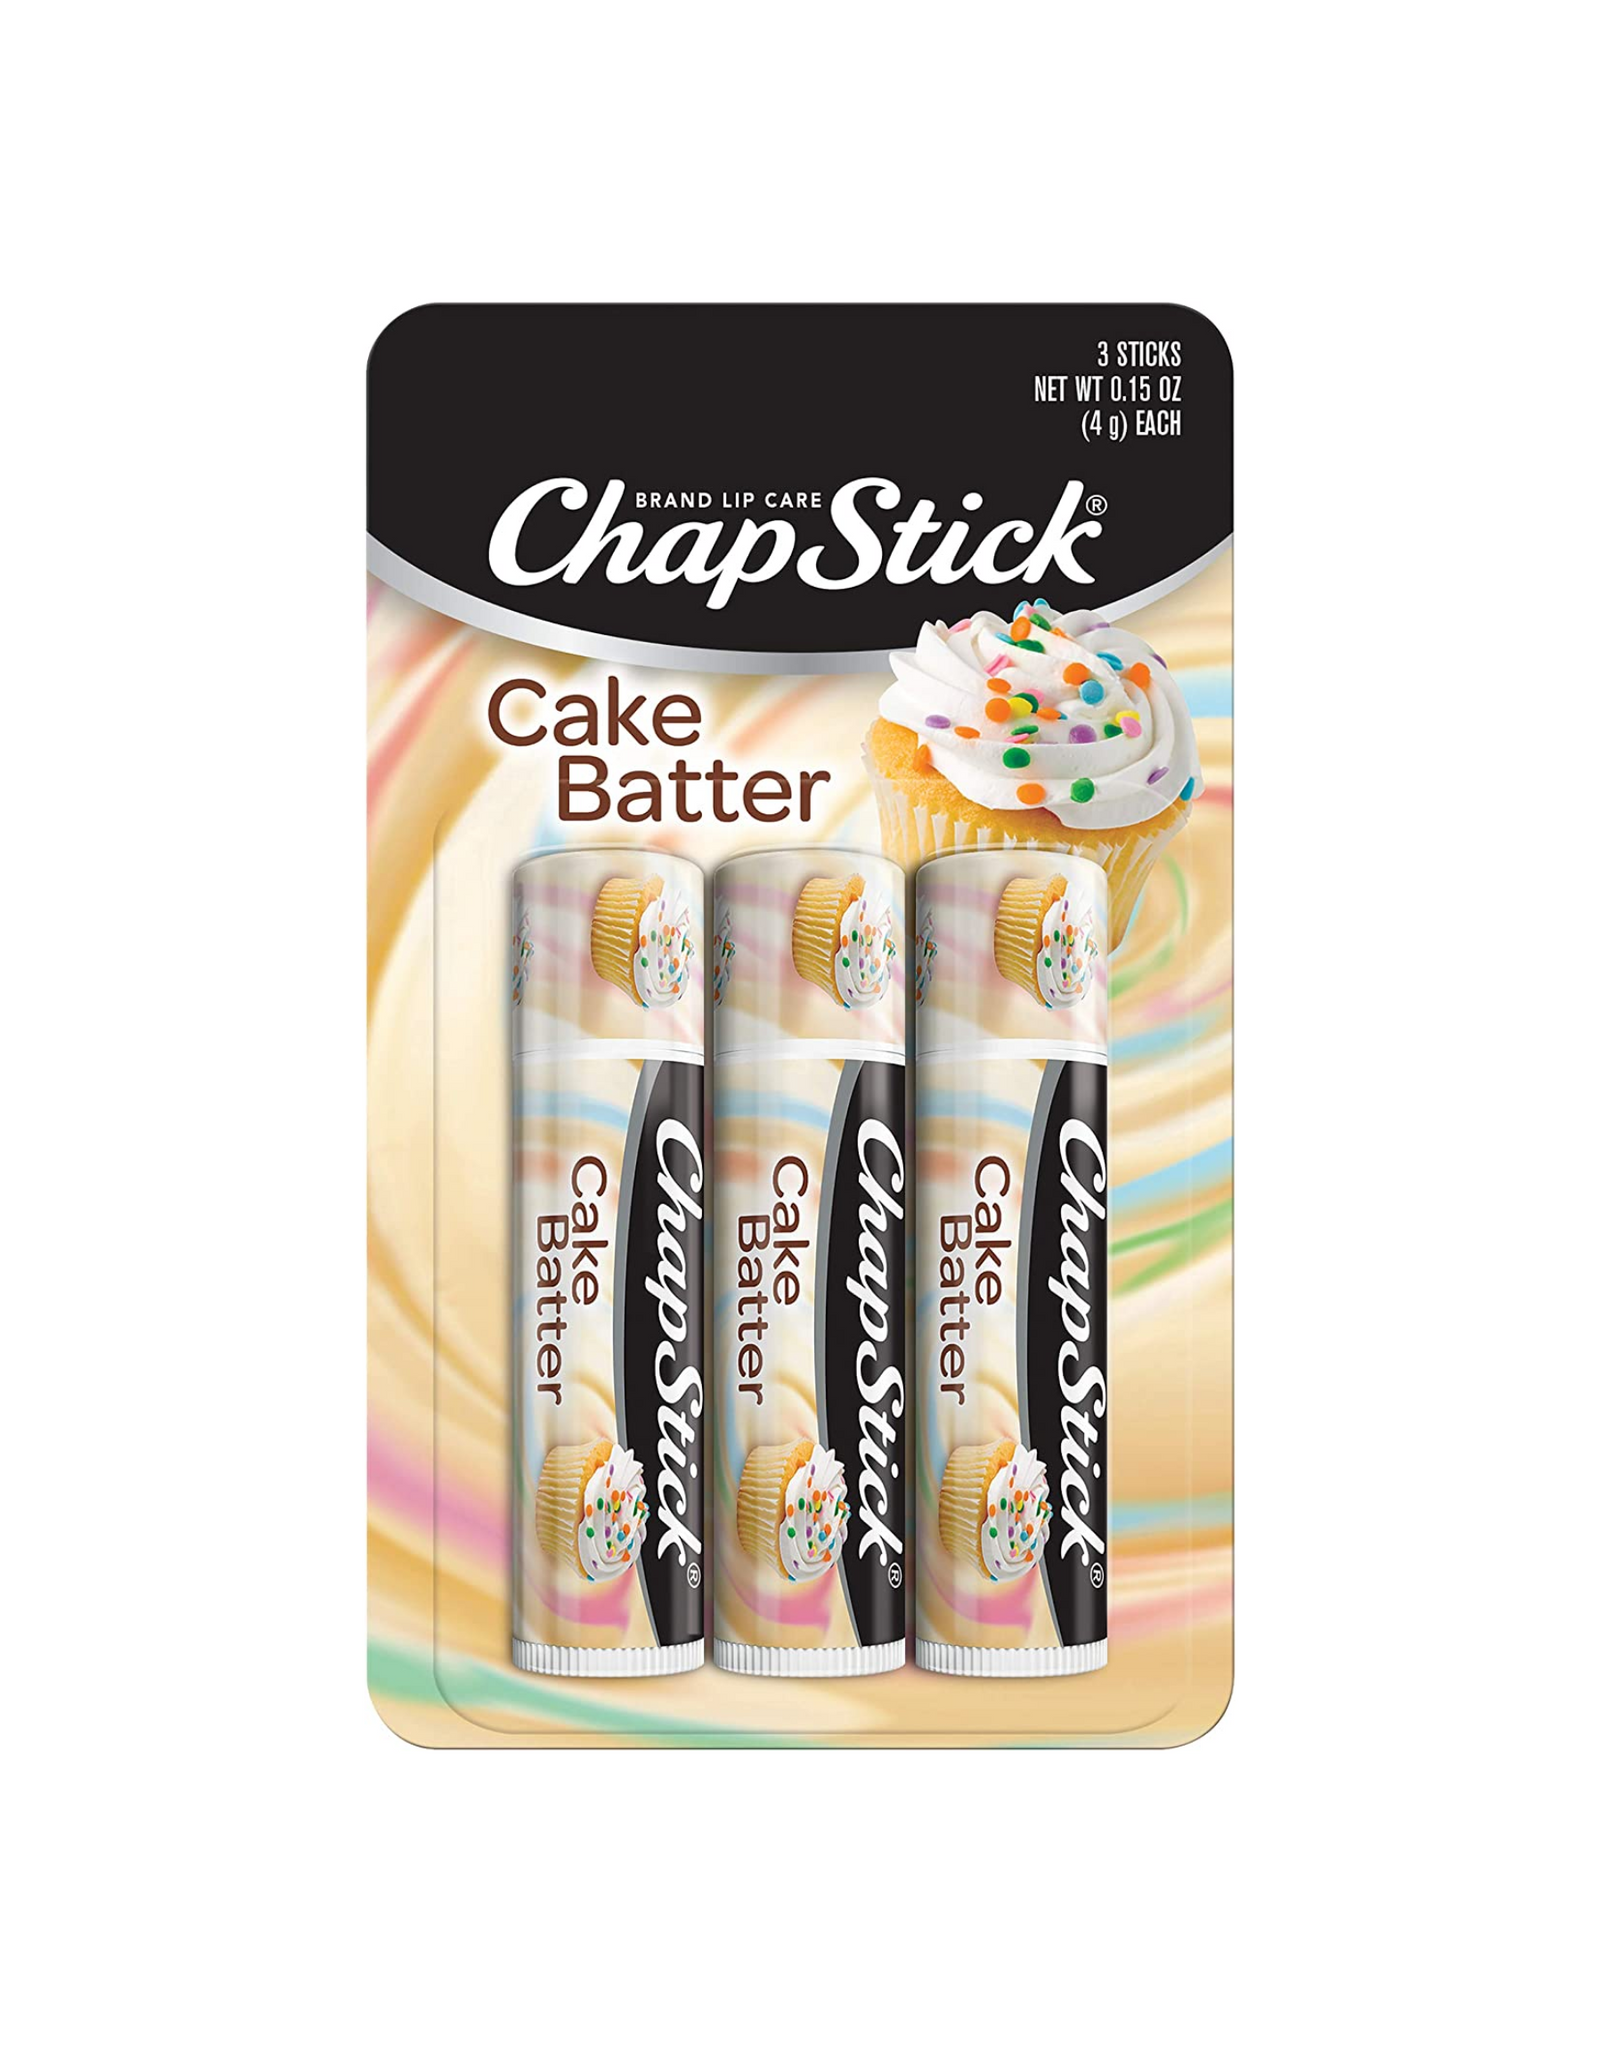 ChapStick Cake Batter Limited Edition, Skin Protectant, 0.15 Oz (Pack of 3)